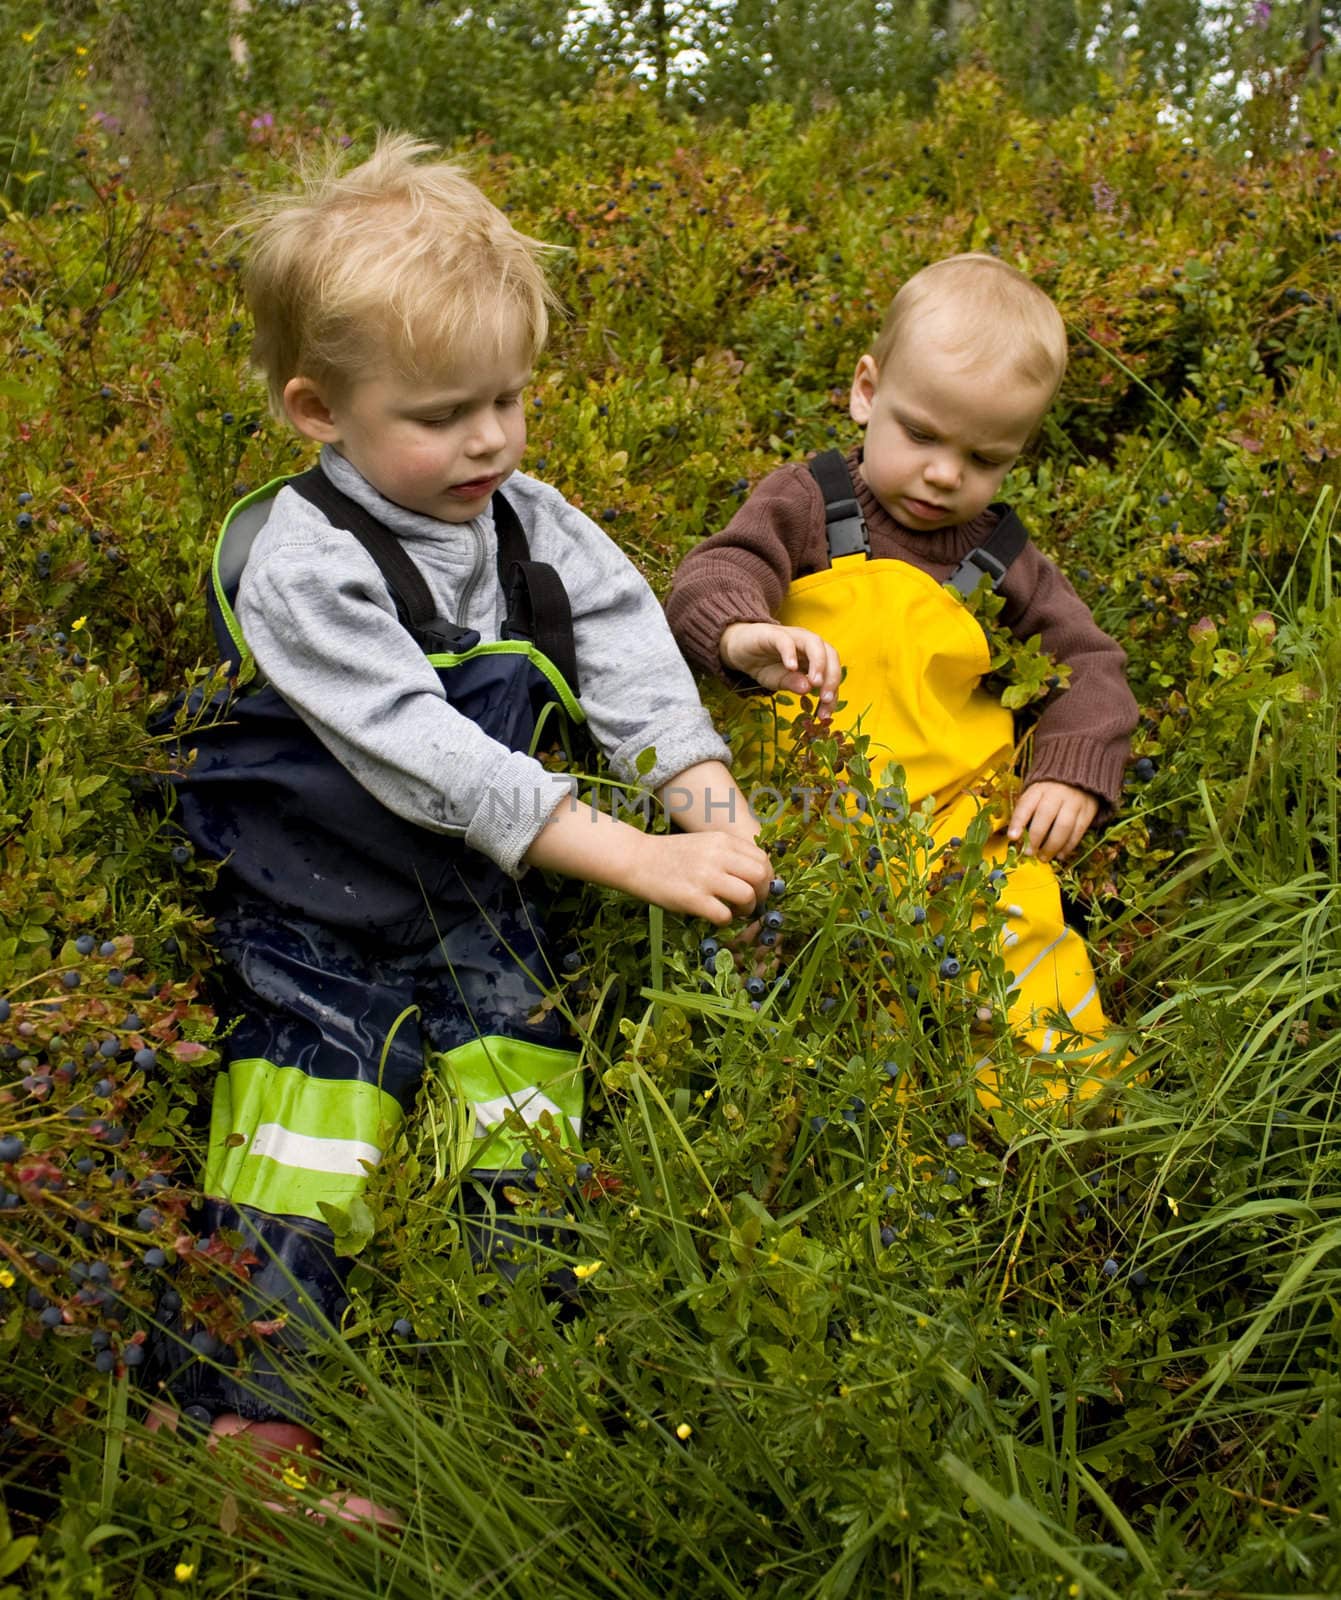 Small children (1 and 3 years old) sitting in a forest picking bilberries (European blueberries).